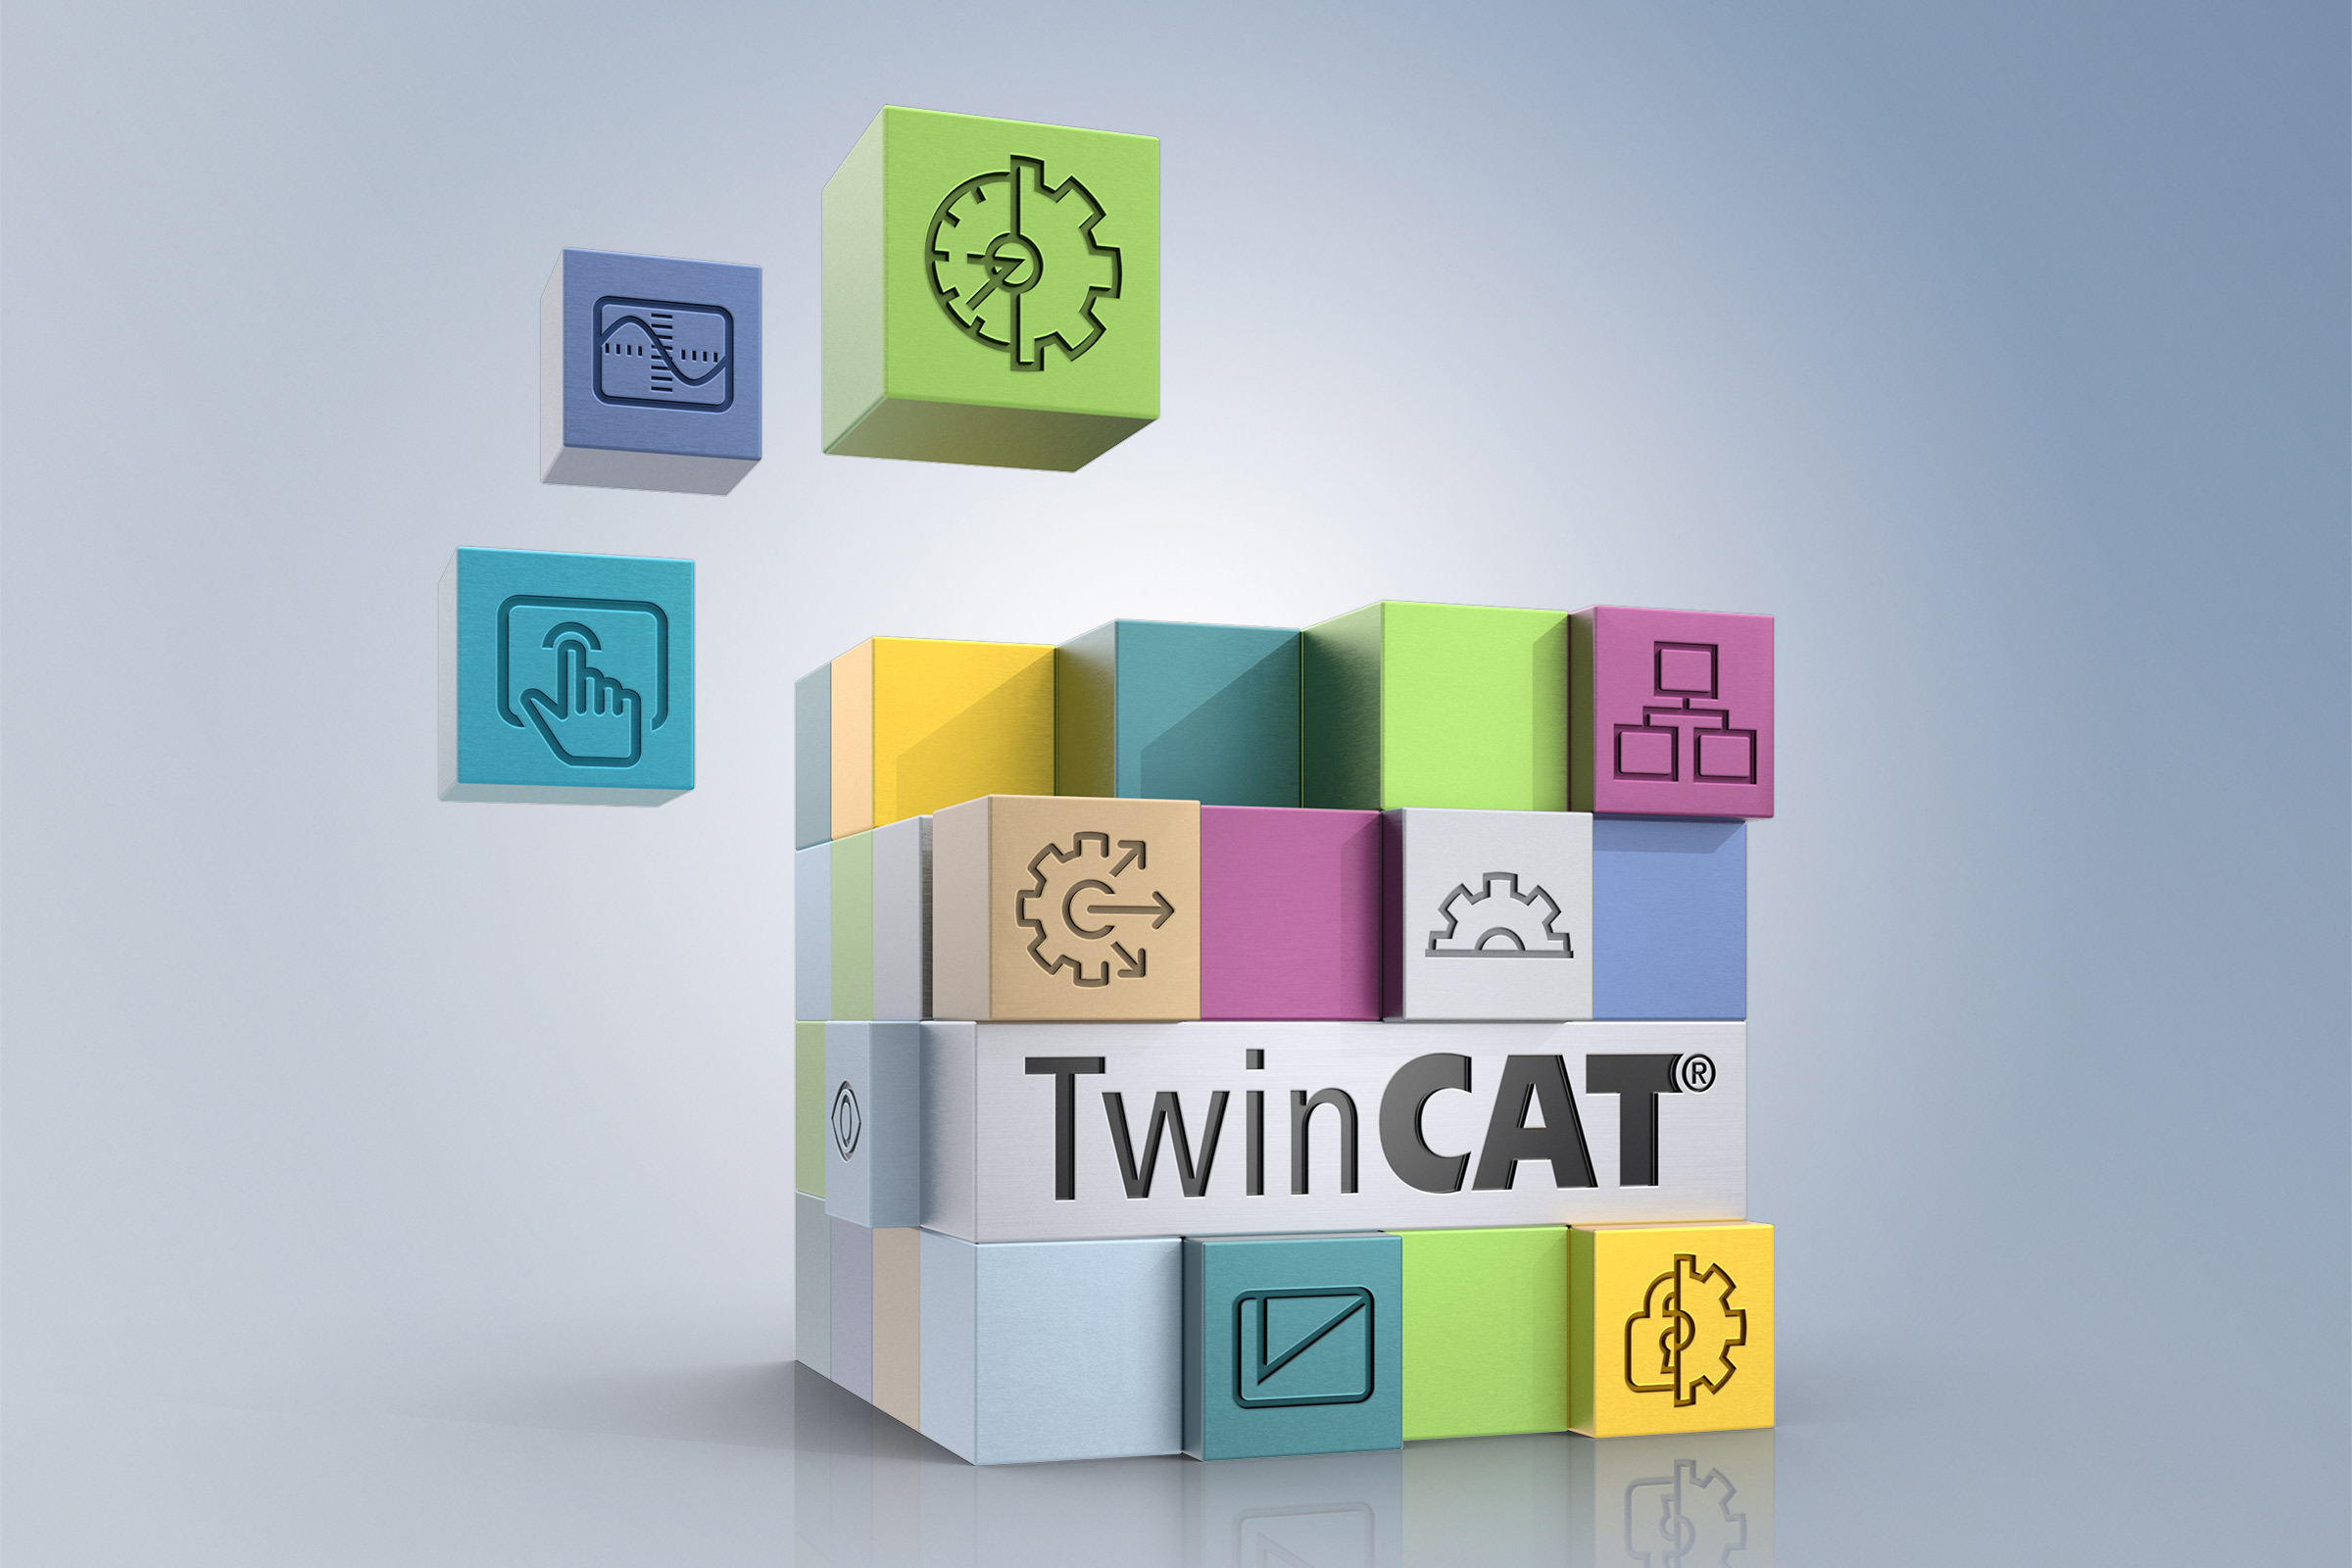 This modular concept of TwinCAT 3 is the key to a modern, flexible, and stable platform with long-term availability, based on which machine series can be continuously developed over many generations with minimum migration effort. 